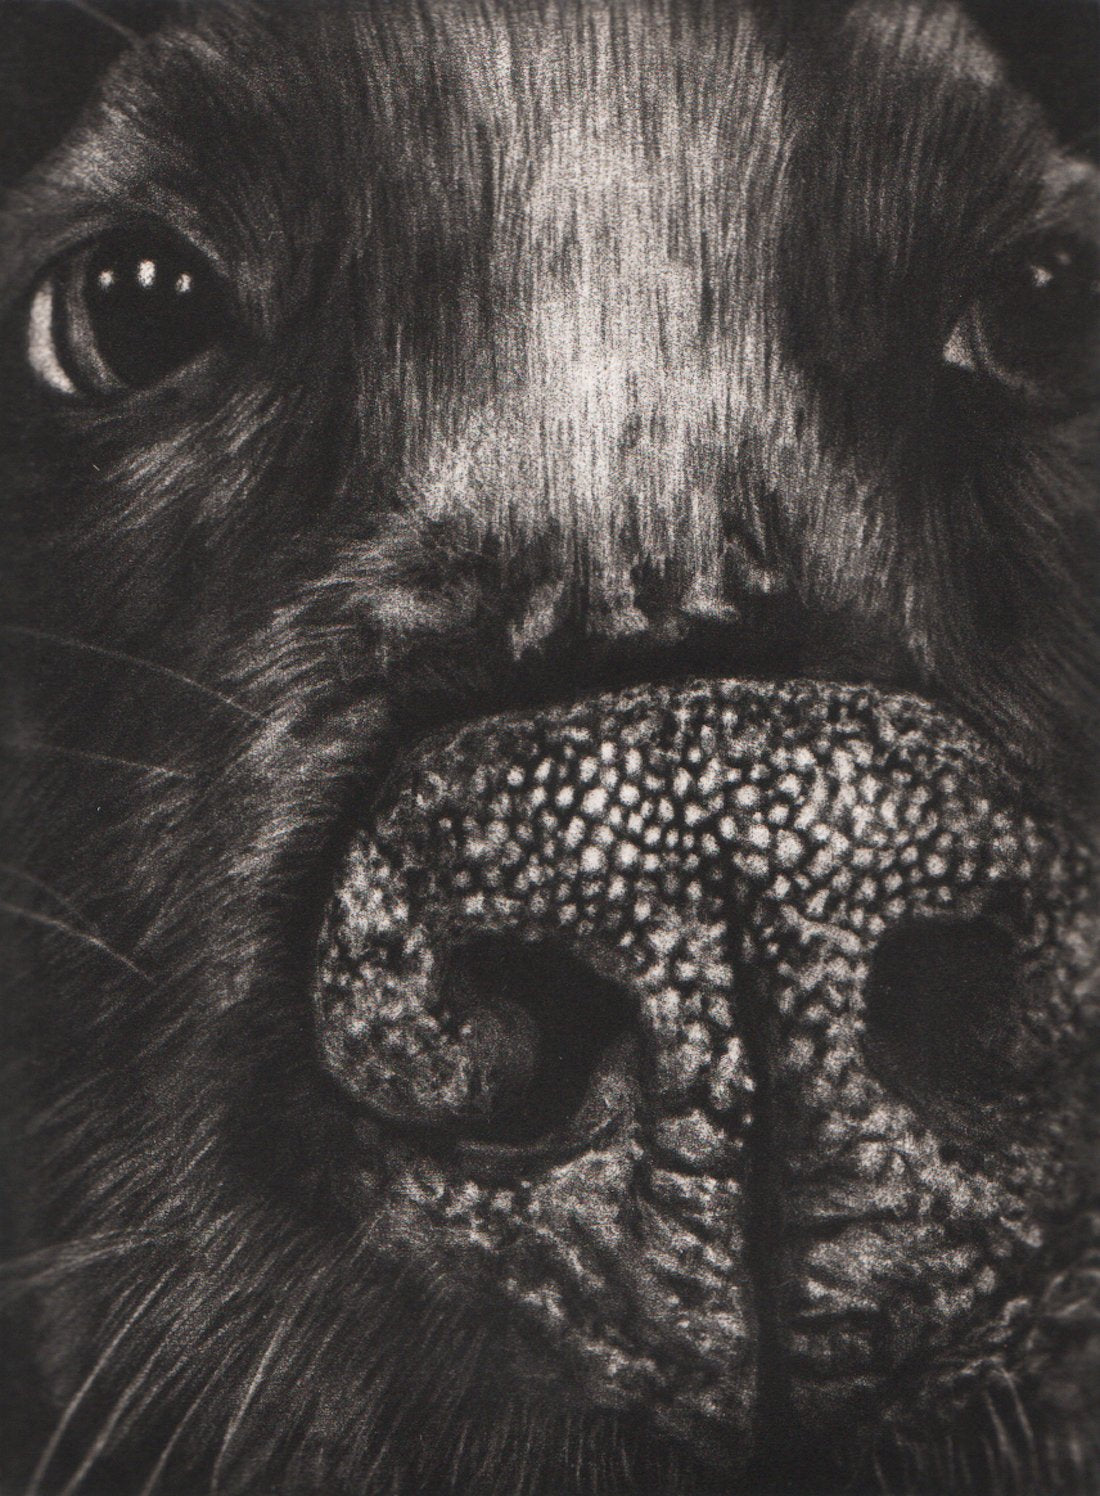 Kirstin Flaherty's 'Pit Bull Portrait.' Black and white mezzotint of a dog's nose and face.